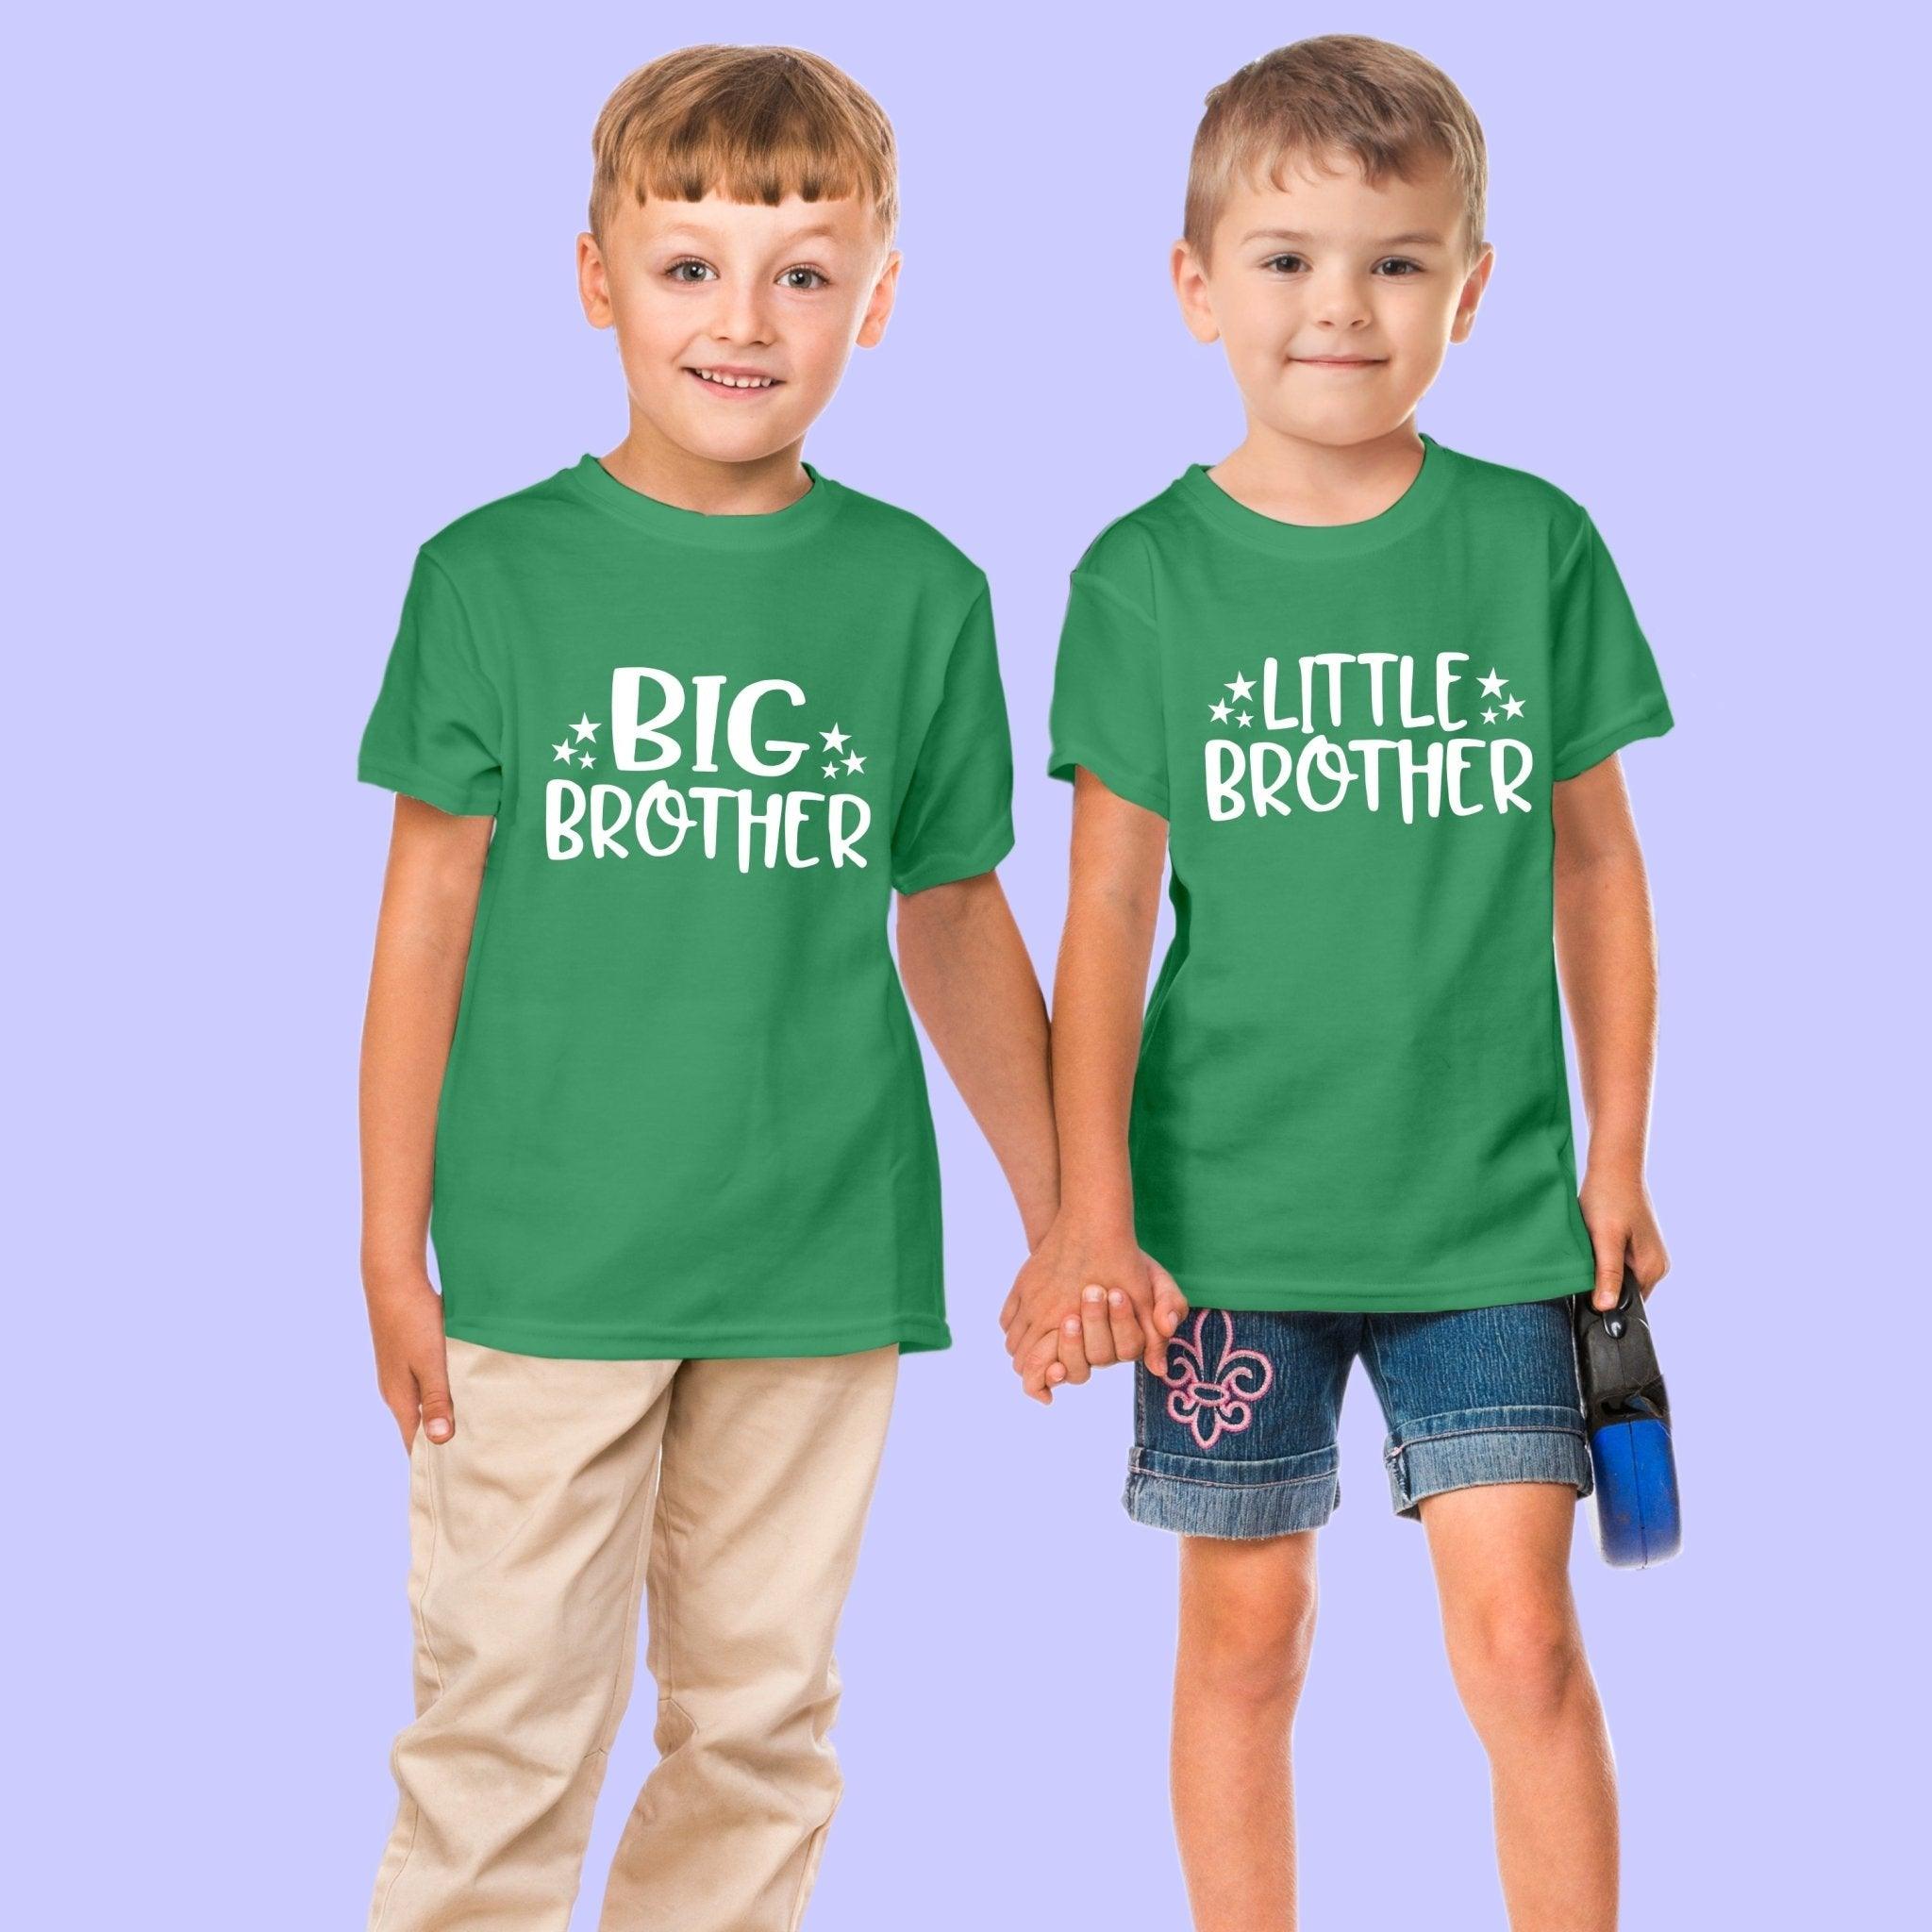 Sibling T Shirt for Kids Brothers in Green Colour - Big Brother Little Brother Variant